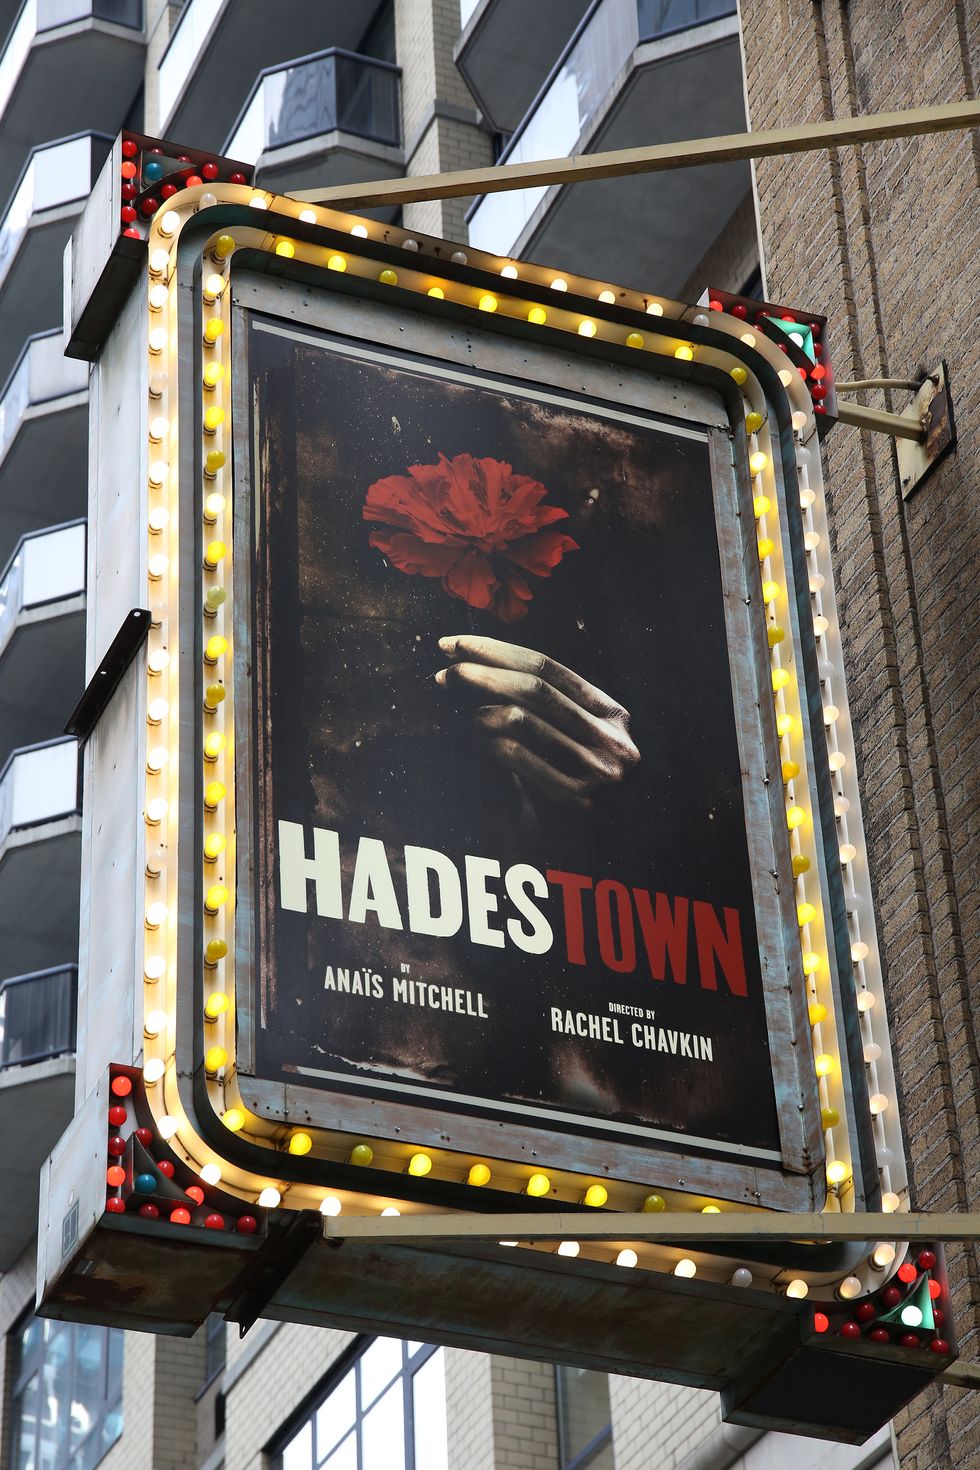 new york, ny   january 04  theatre marquee unveiling for "hadestown", a musical by singer songwriter anais mitchell and directed by rachel chavkin, at the walter kerr theatre on january 4, 2019 in new york city  photo by walter mcbridegetty images